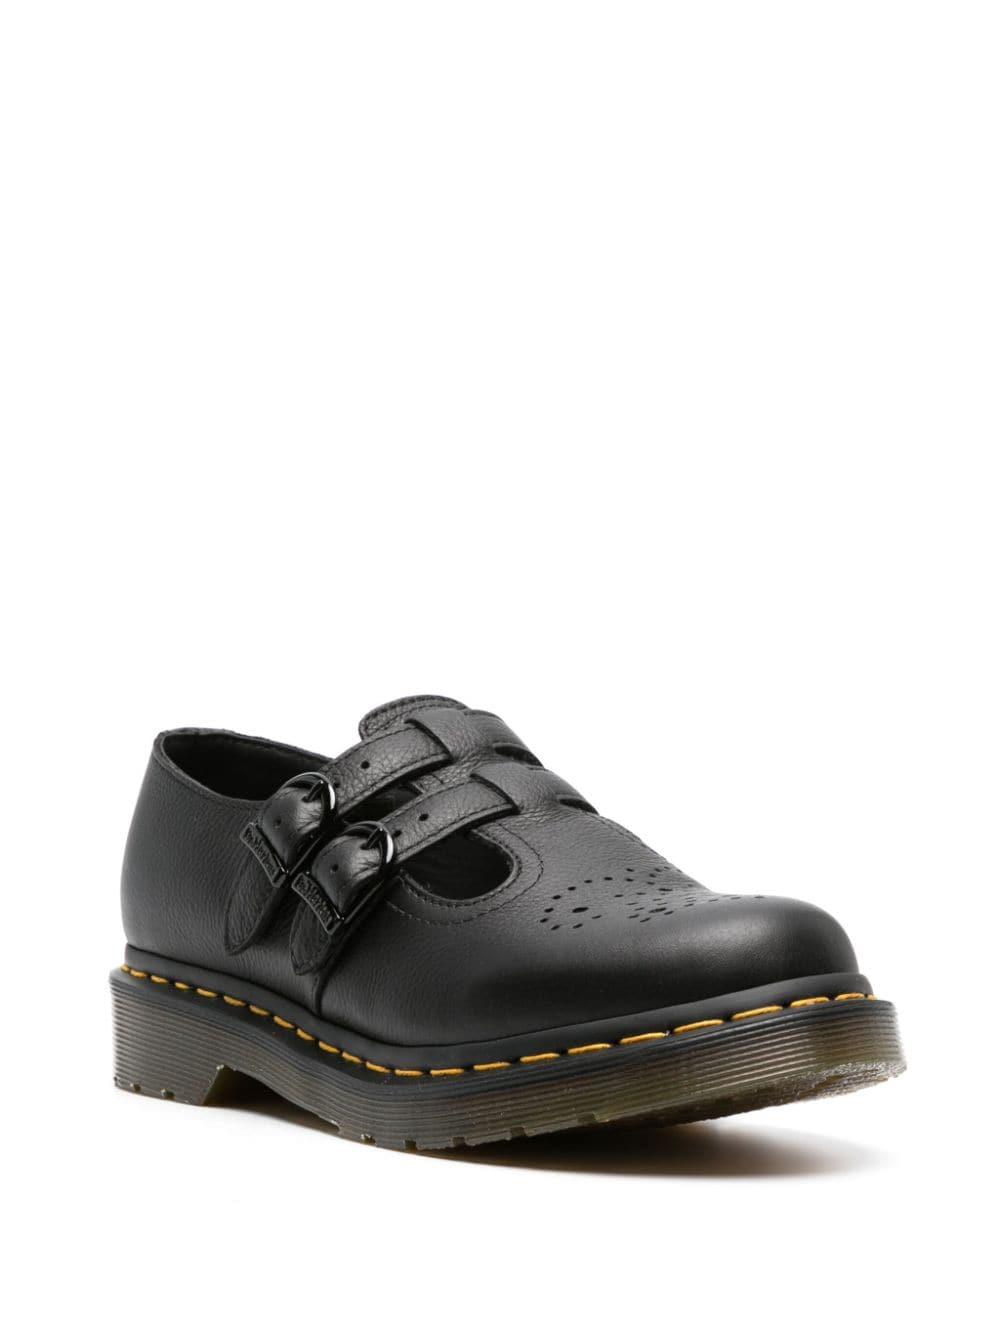 Dr. Martens Virginia leather Mary Janes - Black